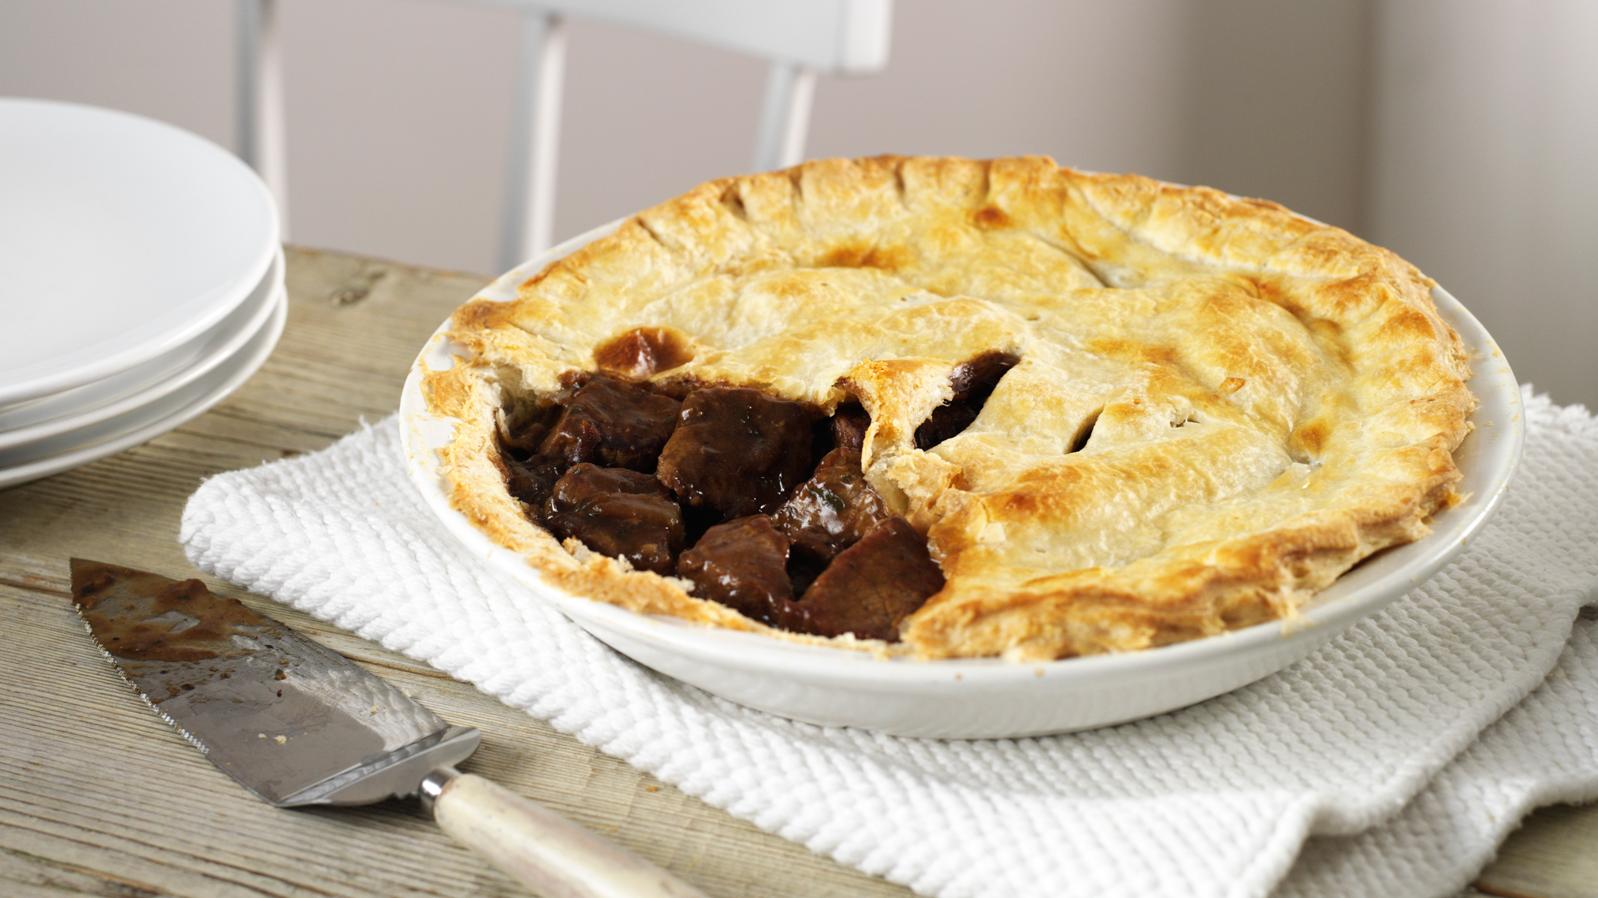  Our English Beef Steak Pie is the perfect comfort food on a chilly day